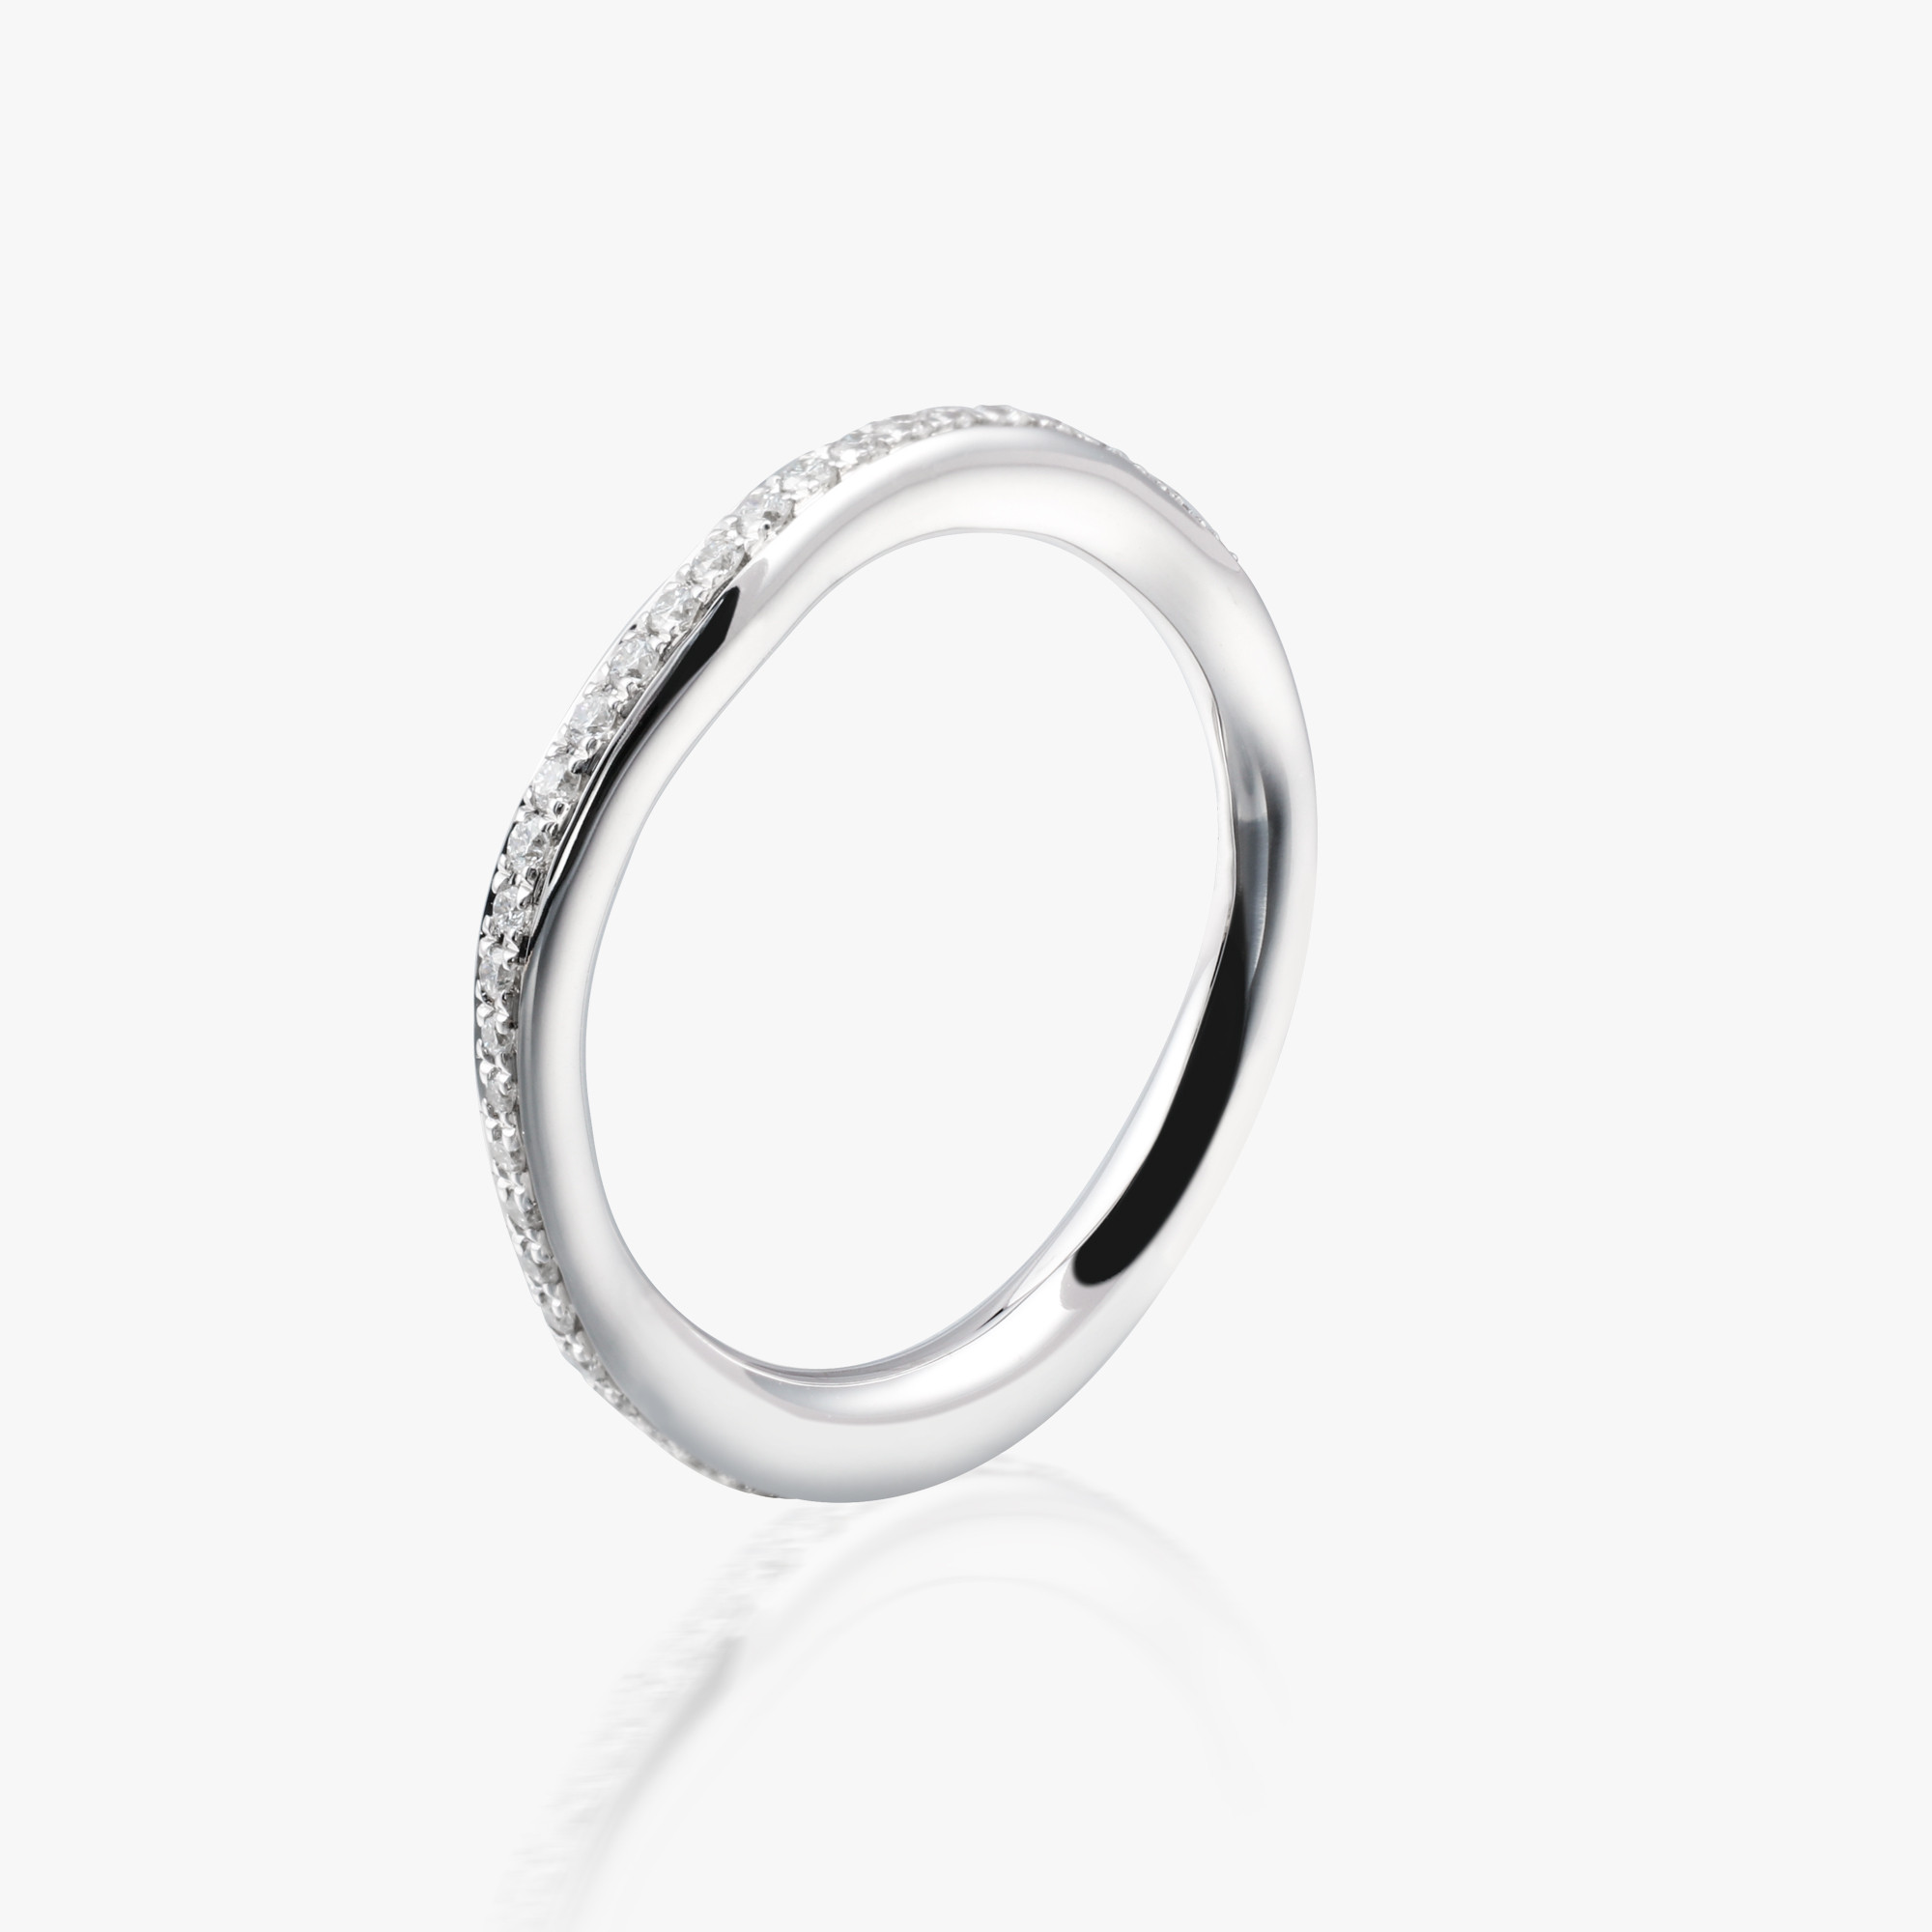 ACCA 14KW Ring with Diamond